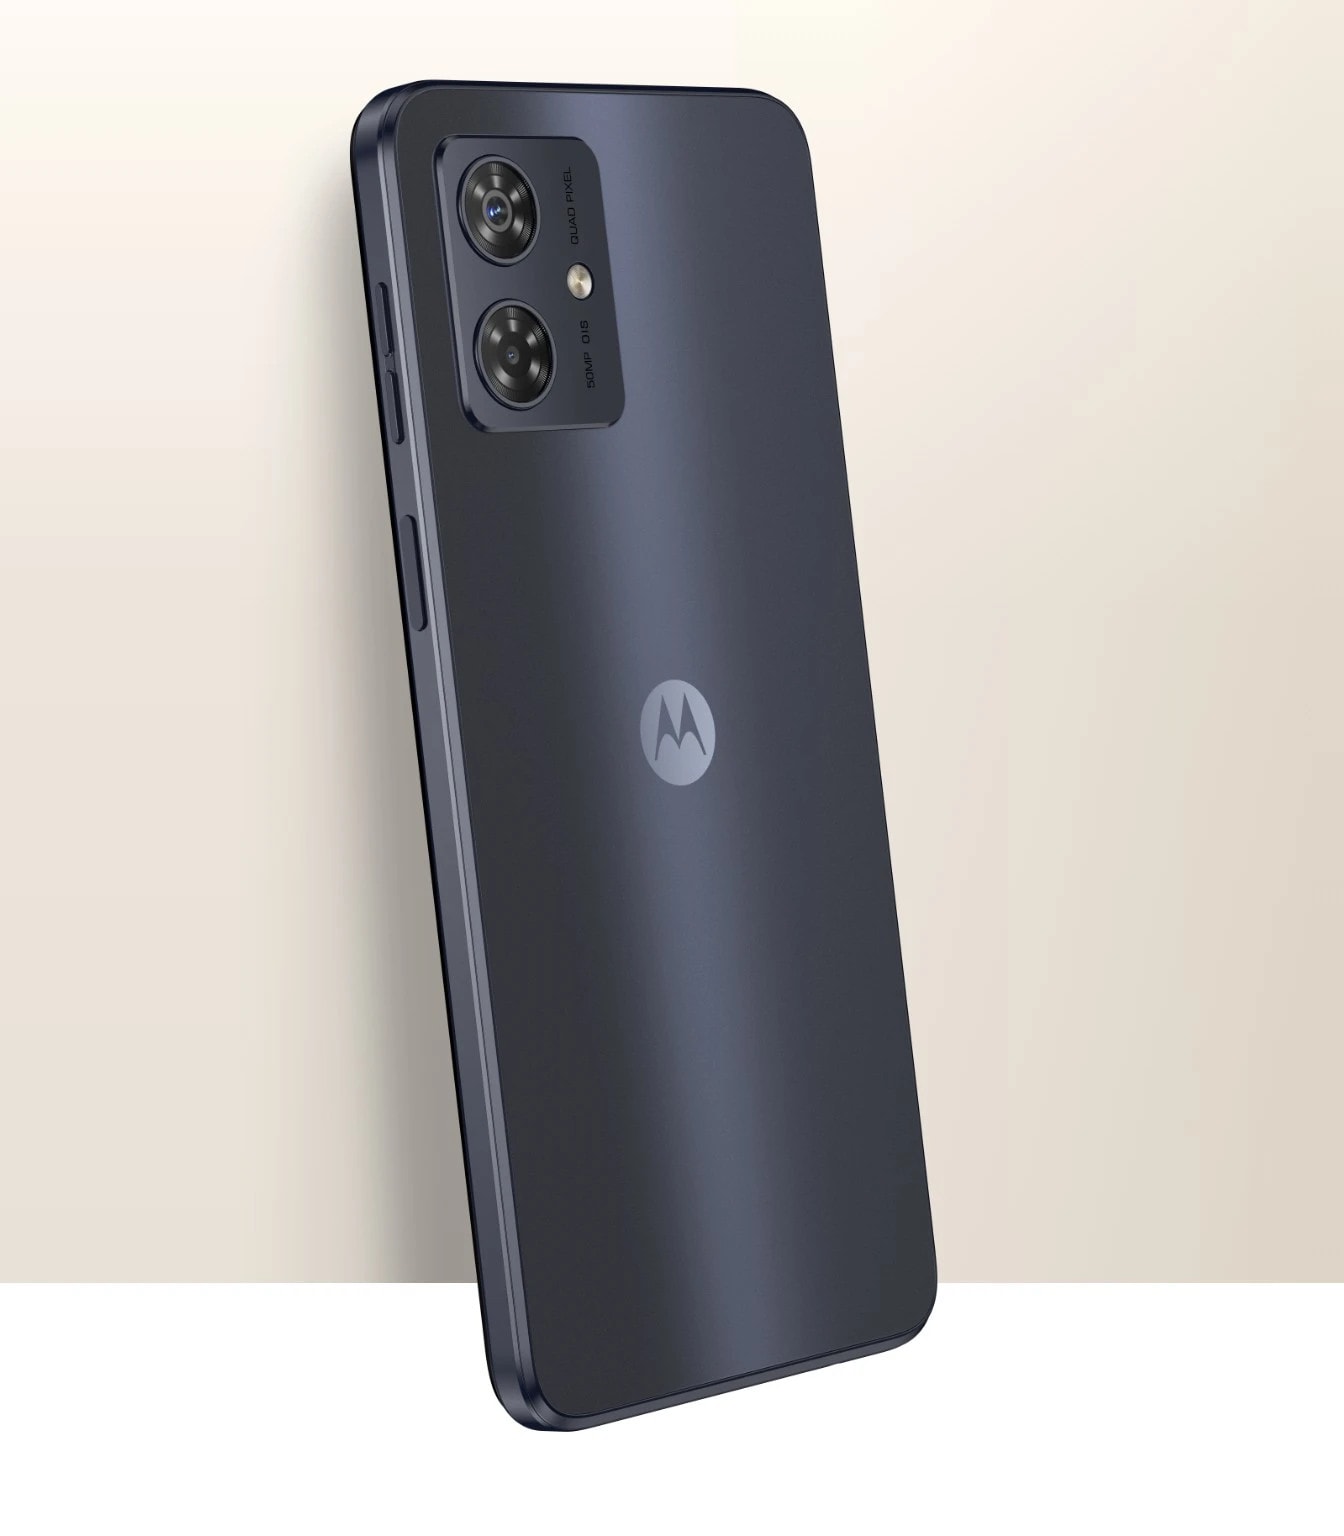 Moto G54 5G sale starts today! Price, features, and availability